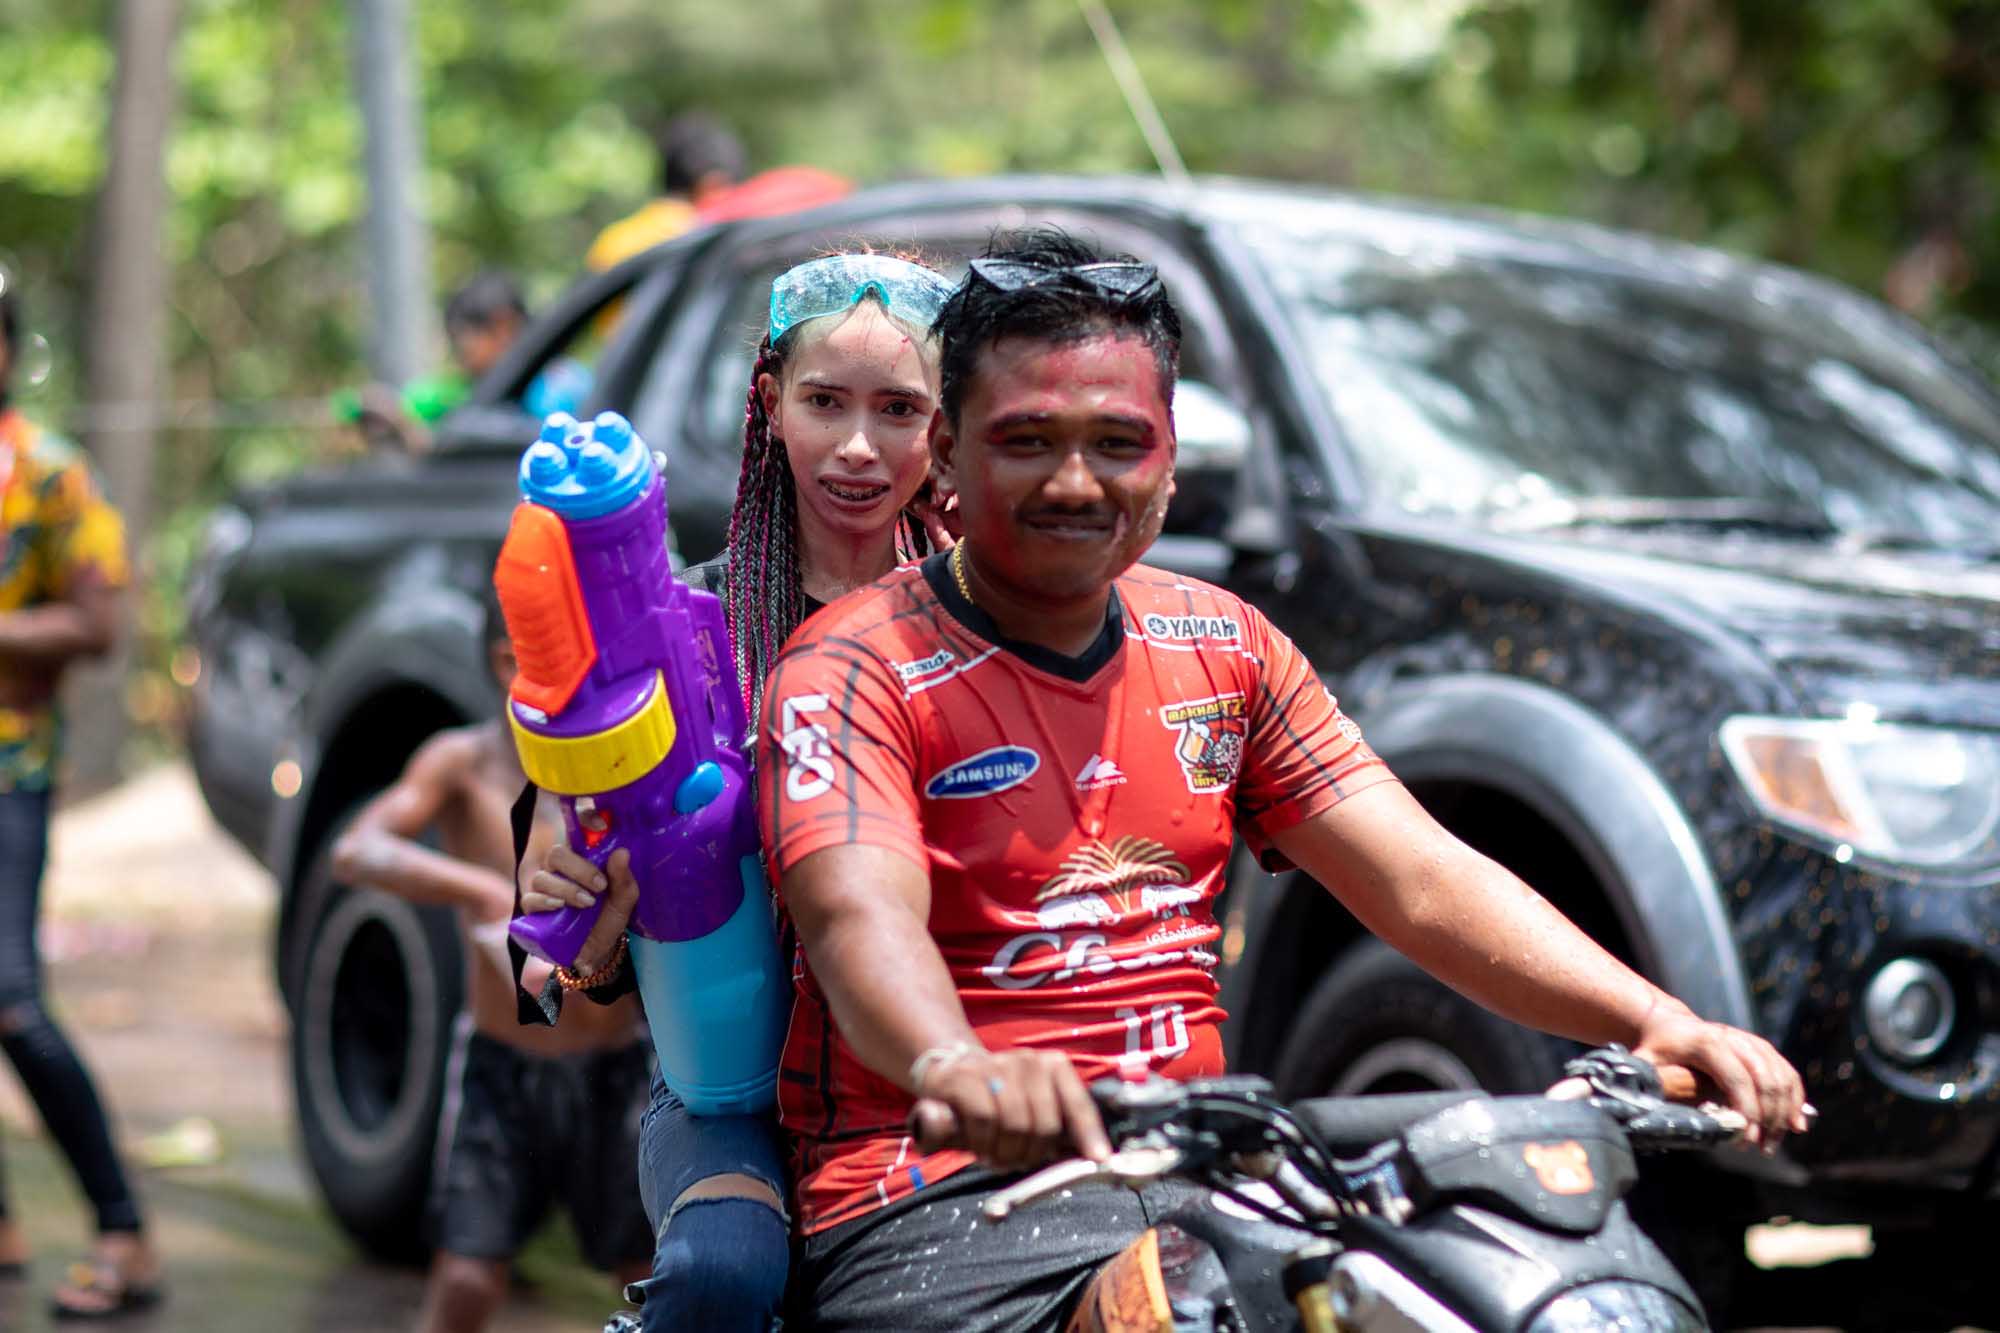 Man and woman on a motorcycle curing Songkran water festival in Phuket, Thailand | Street Photography | Travel Photography | Festival Photography